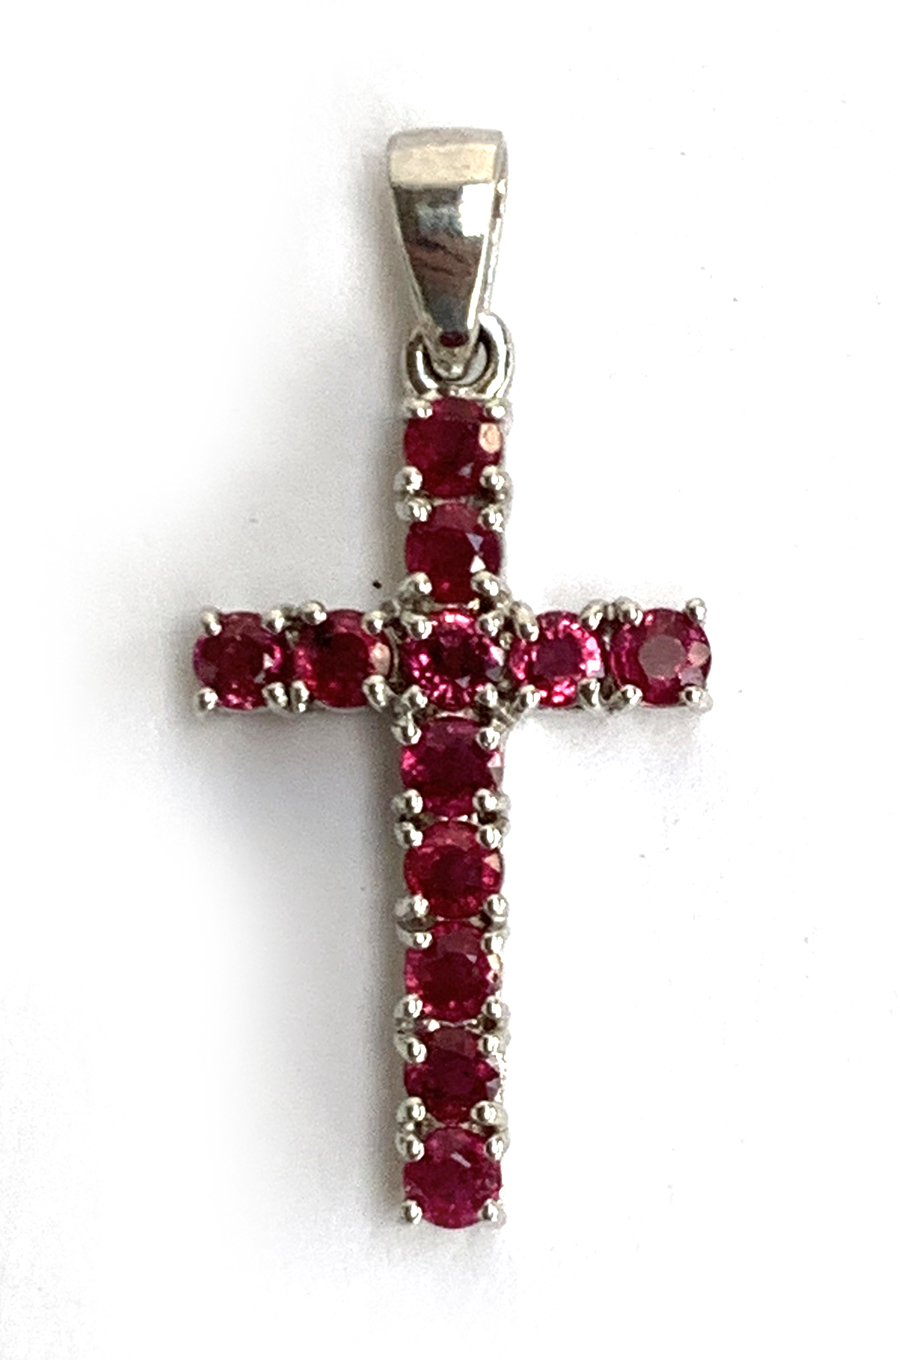 A 9ct white gold and ruby crucifix pendant, 2.8cmL, approx. 2.5g